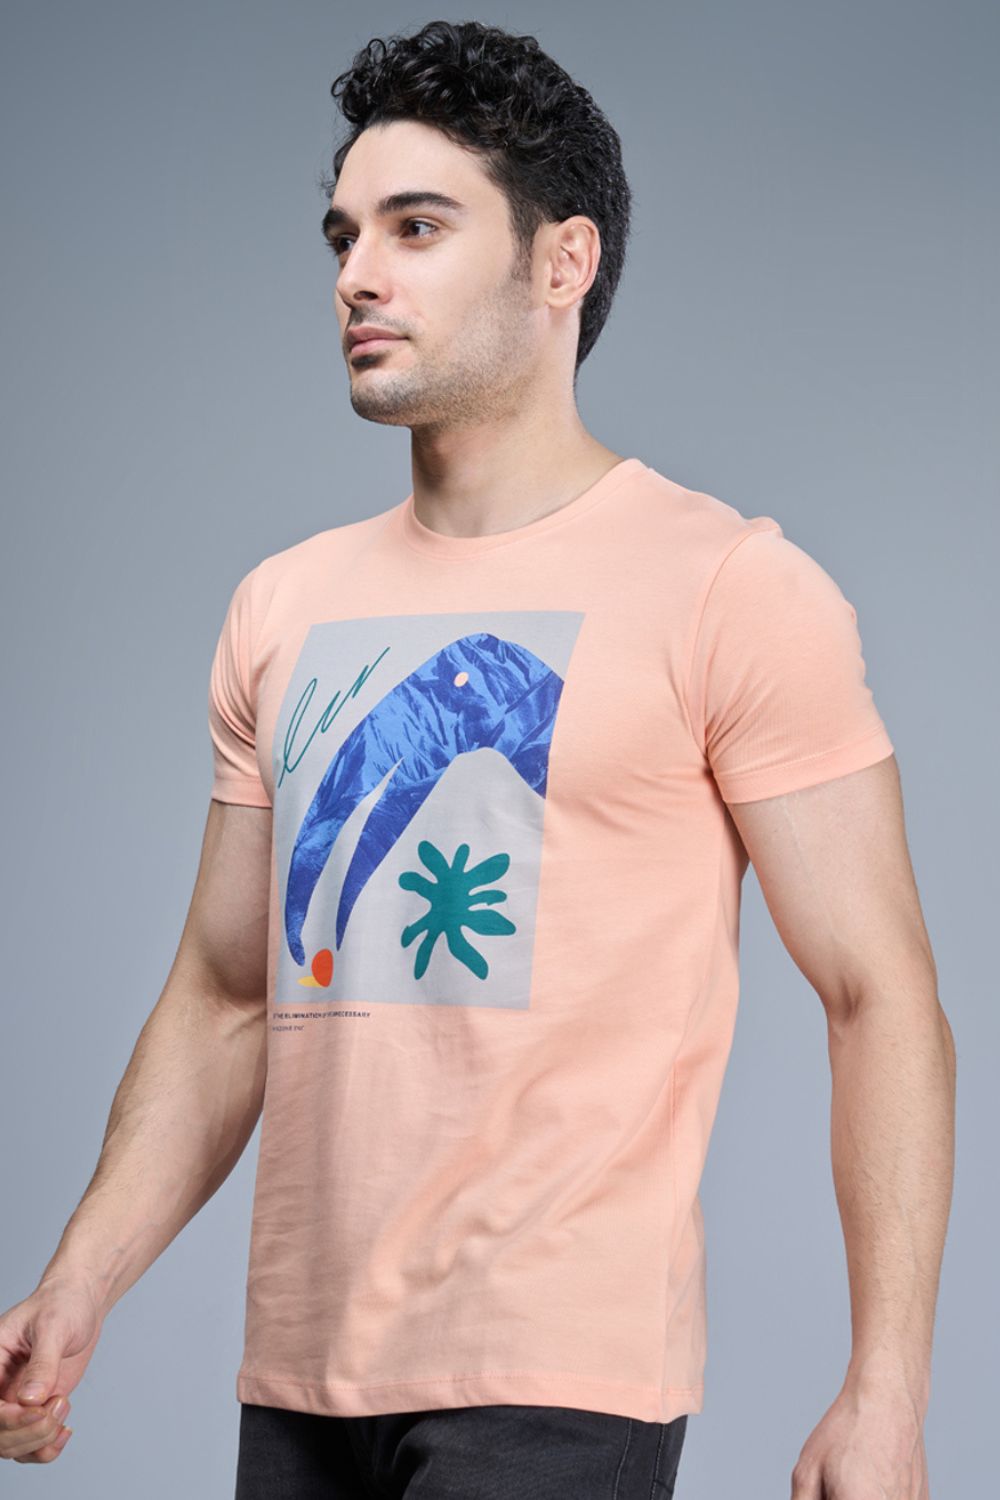 Peach colored, cotton Graphic T shirt for men, half sleeves and round neck, side view.